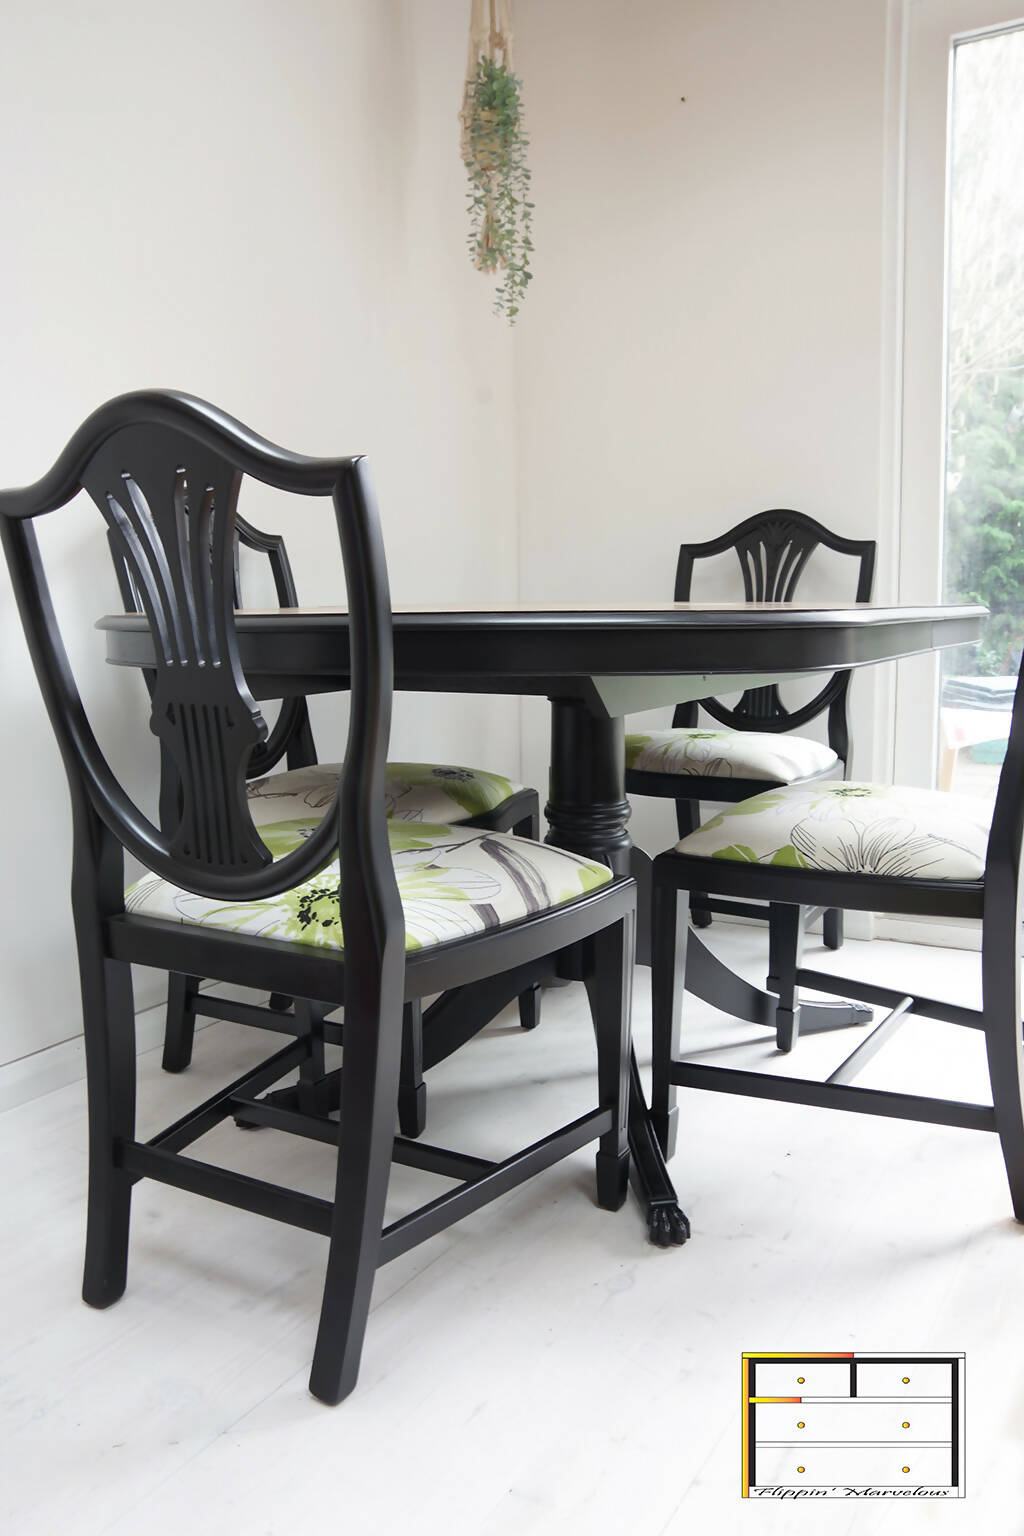 Vintage Bradley Dining Table and 4 Chairs, Black Yew Table and Four Wheatear Style Chairs. Extending Dining Set Bill Beaumont Floral Seats